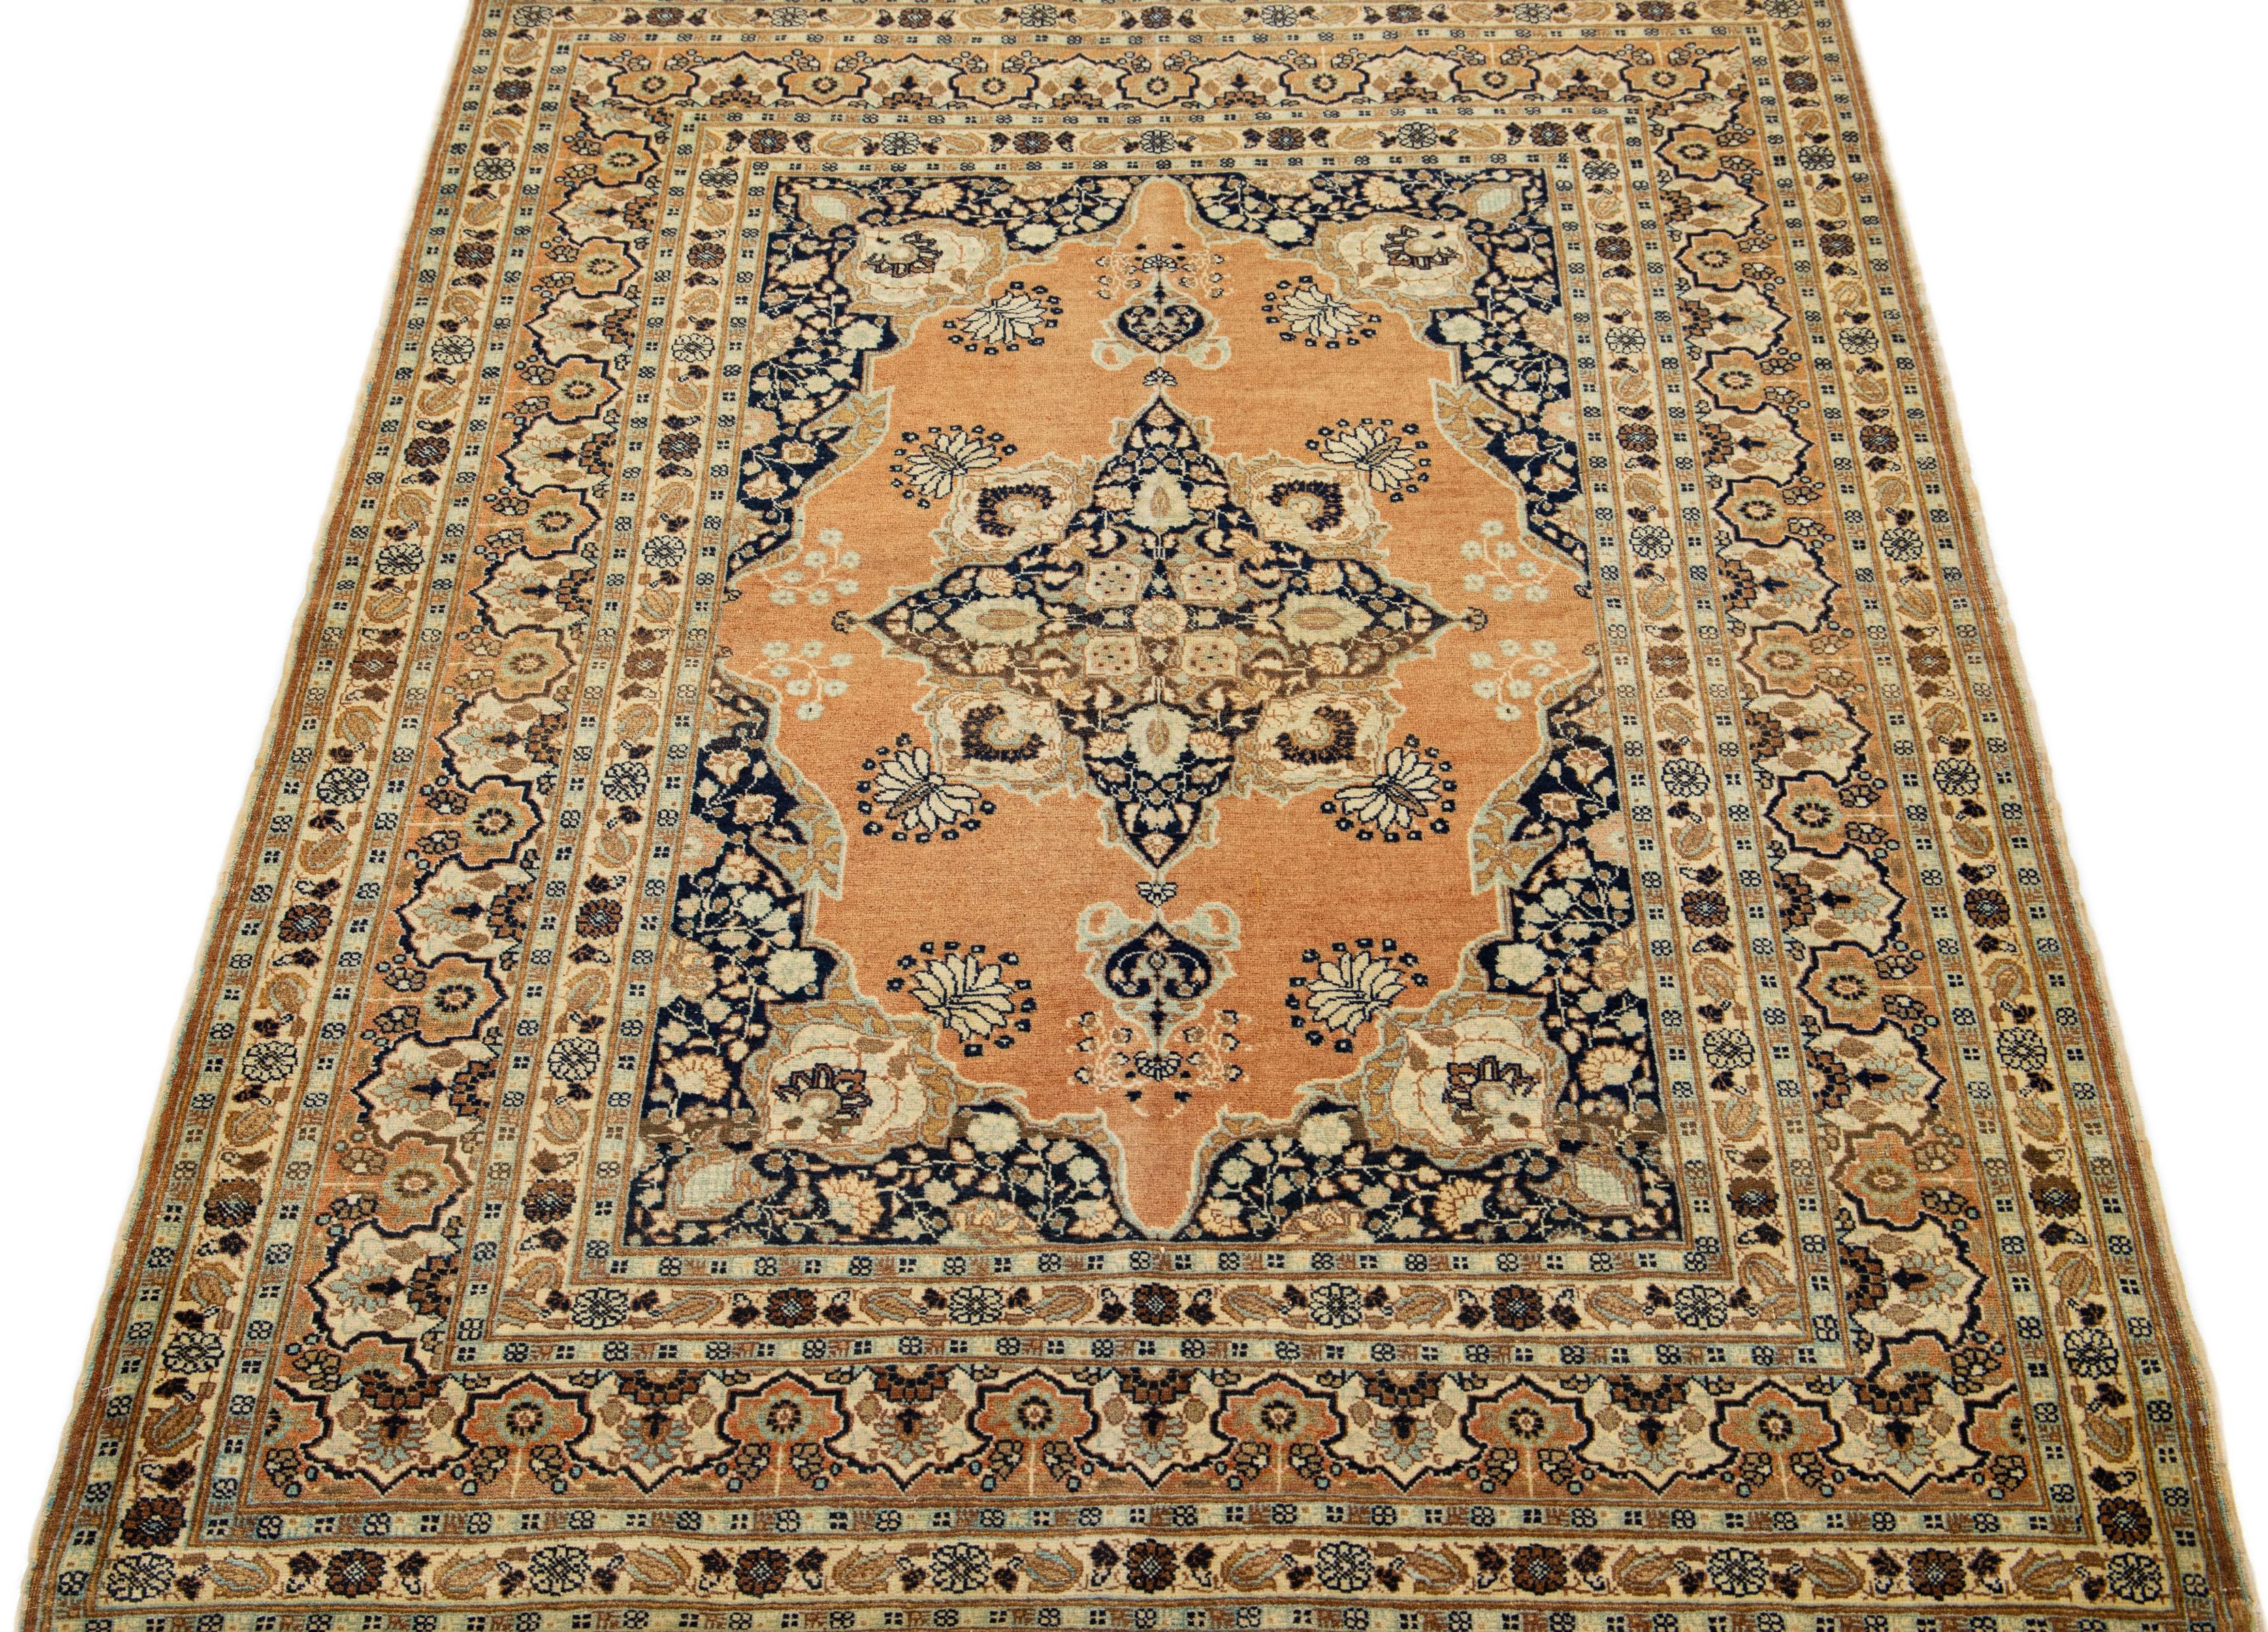 This Persian Tabriz wool rug showcases an exquisite traditional floral medallion design with a striking tan accent against a beige, blue, and brown background. 

This rug measures 4'3